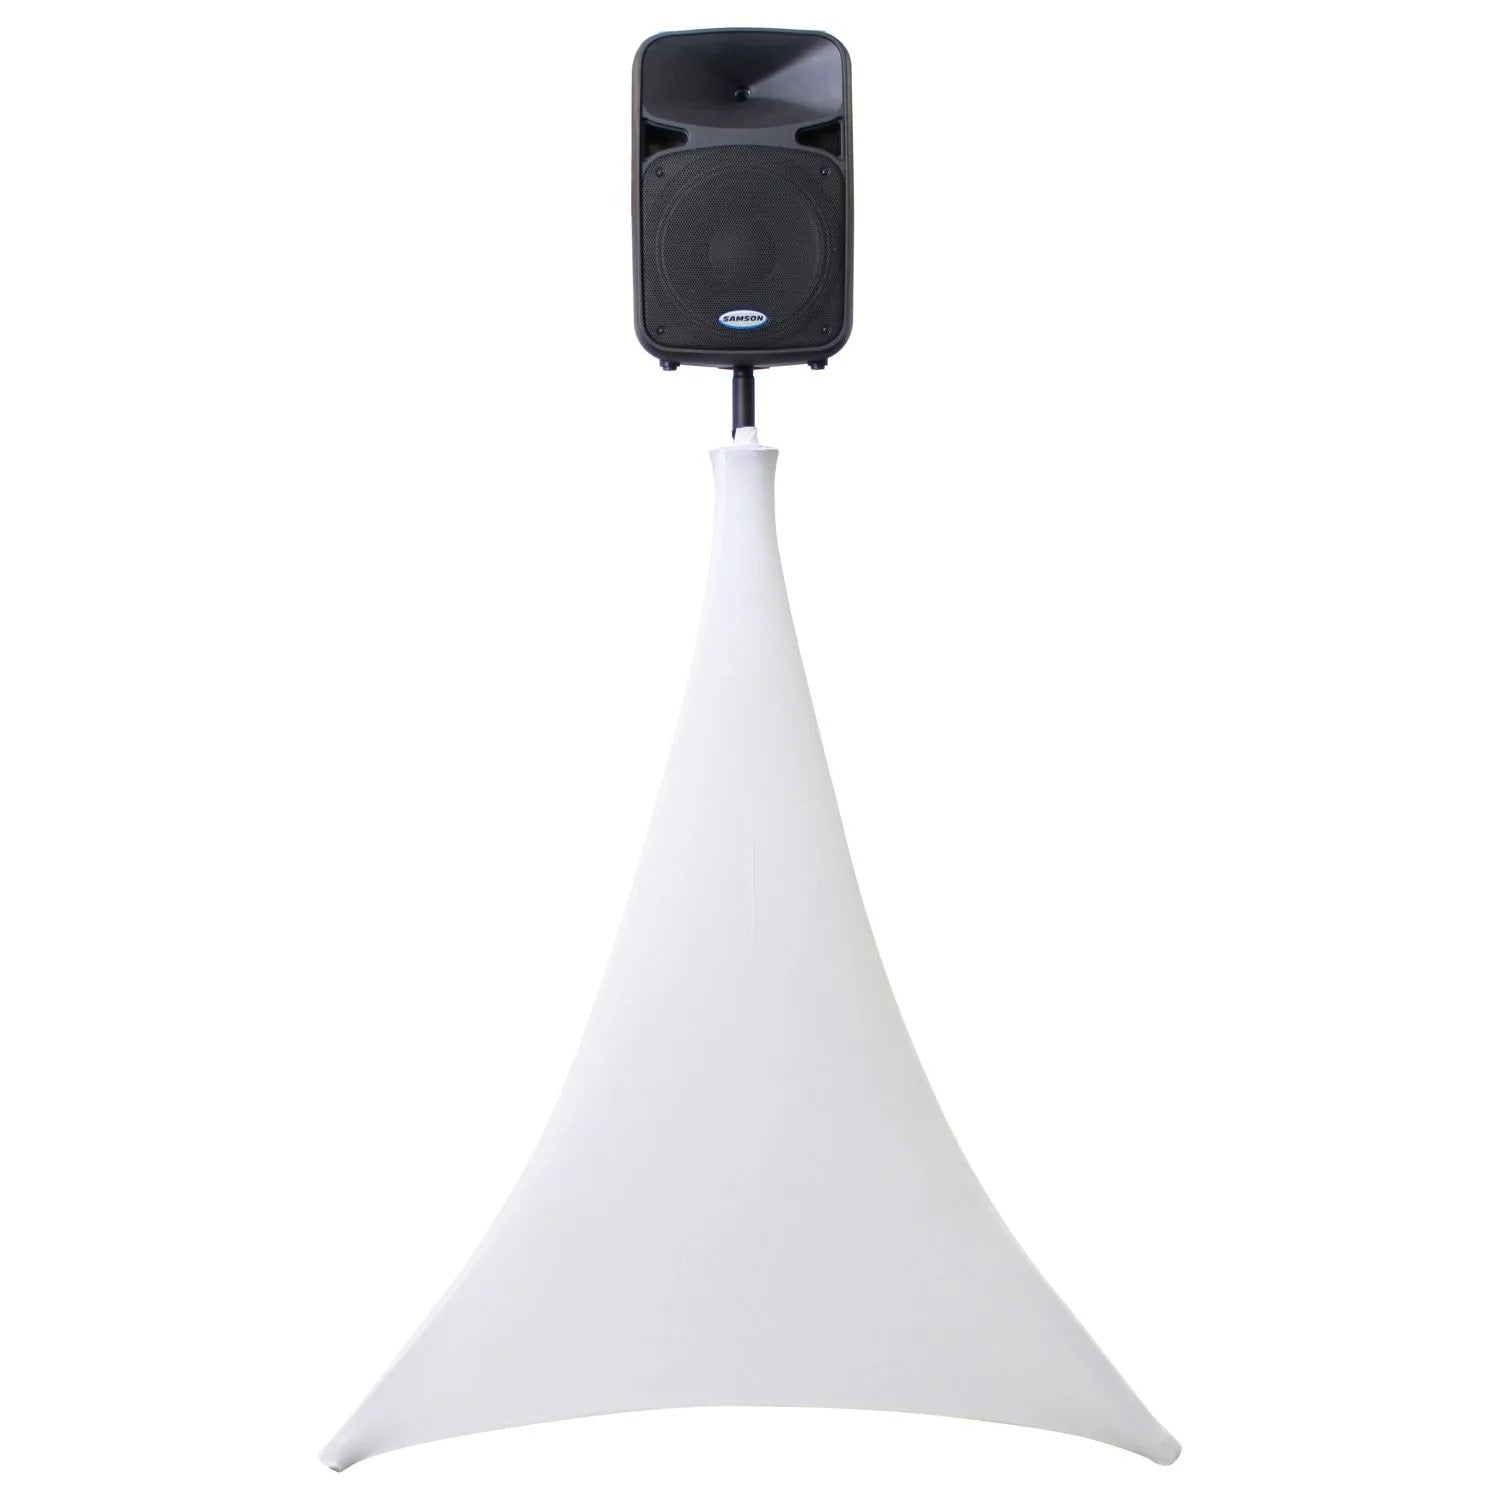 REPLACEMENT SCRIM B-Stock: Odyssey SWLTPSWHT, White Cover All Tripod Stand Slip Scrim by Odyssey